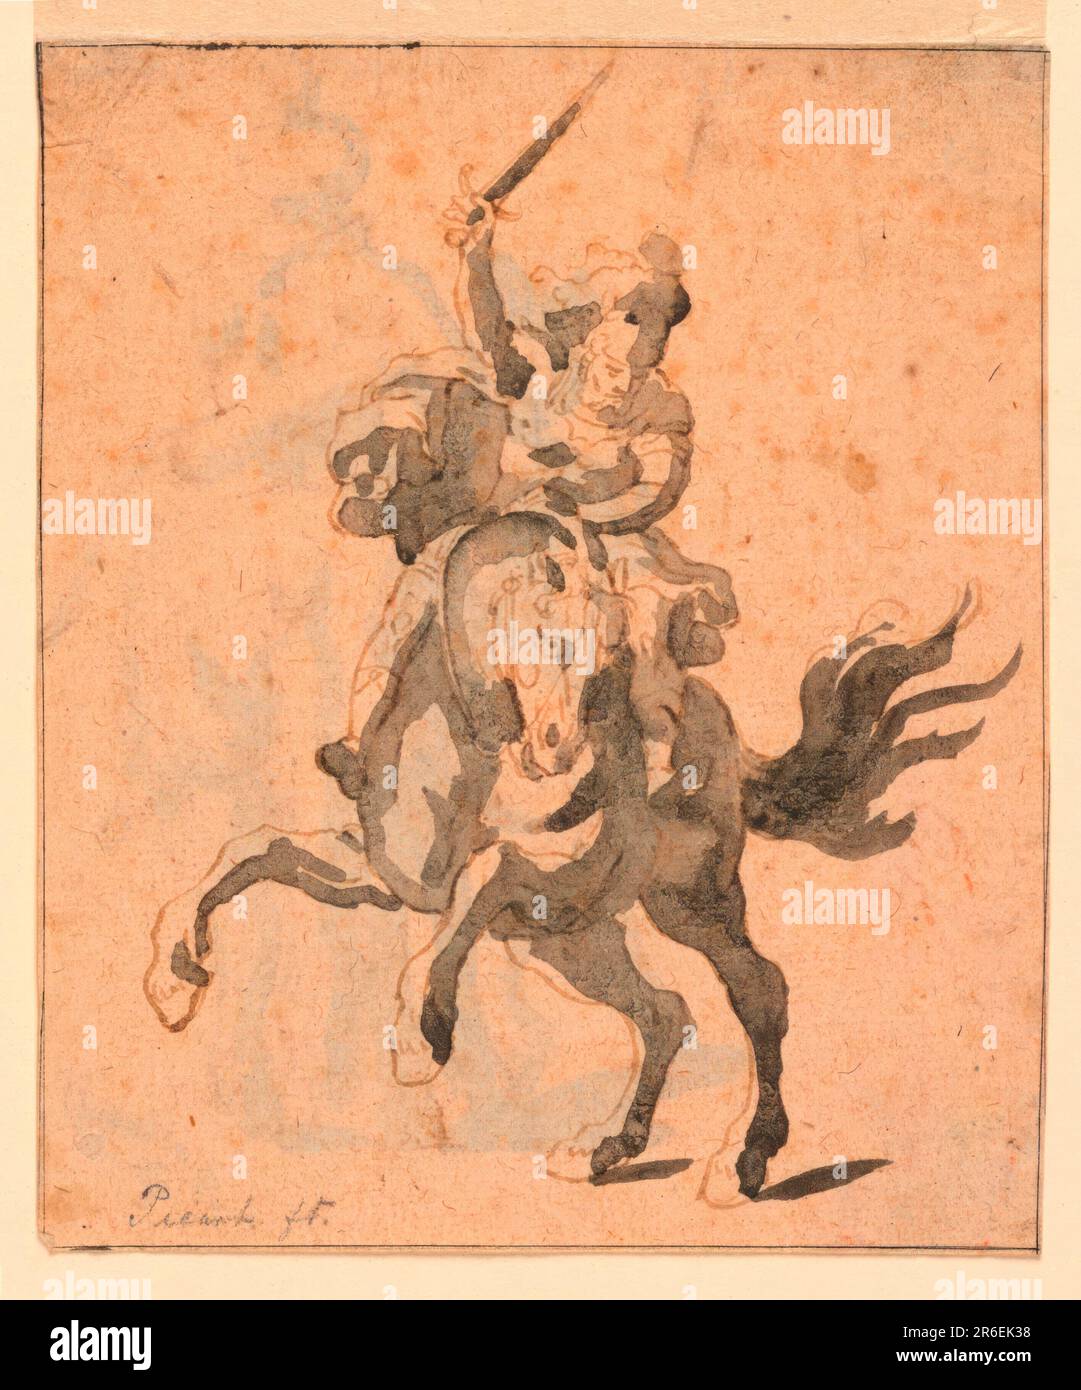 Figure on a rearing horse. Date: 17th century. Pen and ink, brush and wash on paper. Museum: Cooper Hewitt, Smithsonian Design Museum. Stock Photo